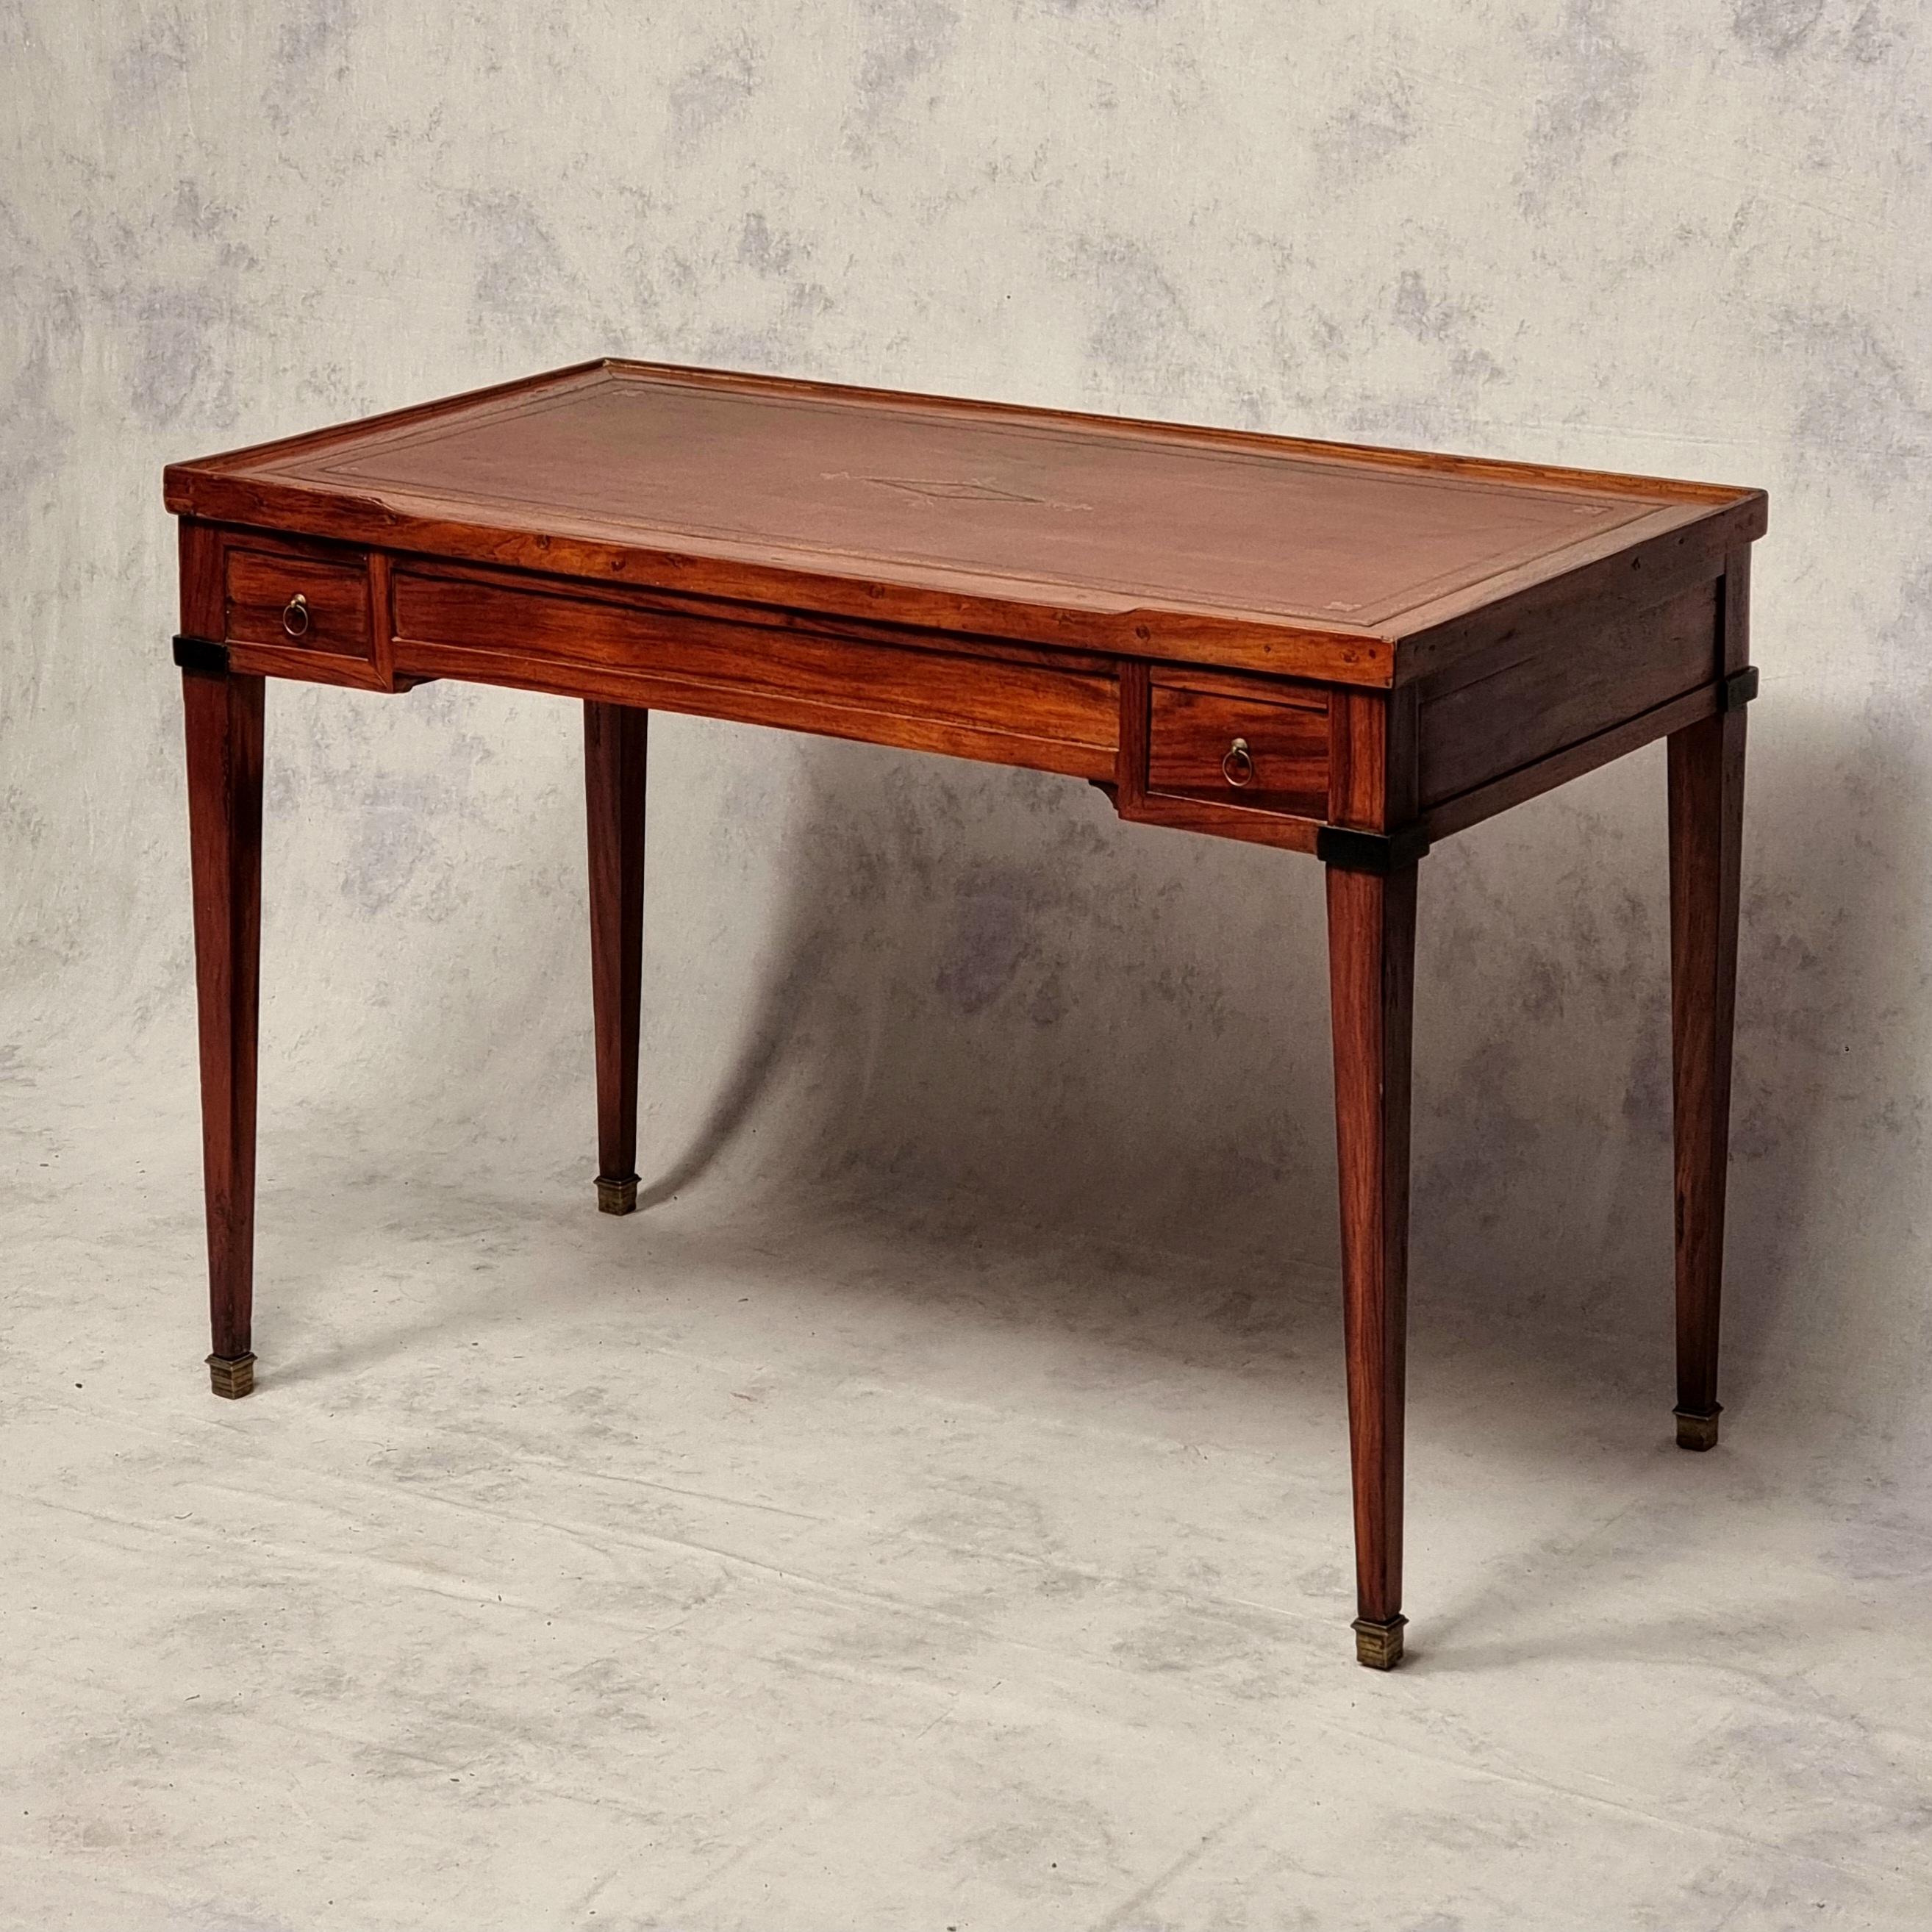 Magnificent games table called tric-trac from the Directoire period. This rectangular table is made of rosewood and ebony veneer mounted on a fir structure. The grain of the wood is magnificent. It has a removable and reversible top with on one side